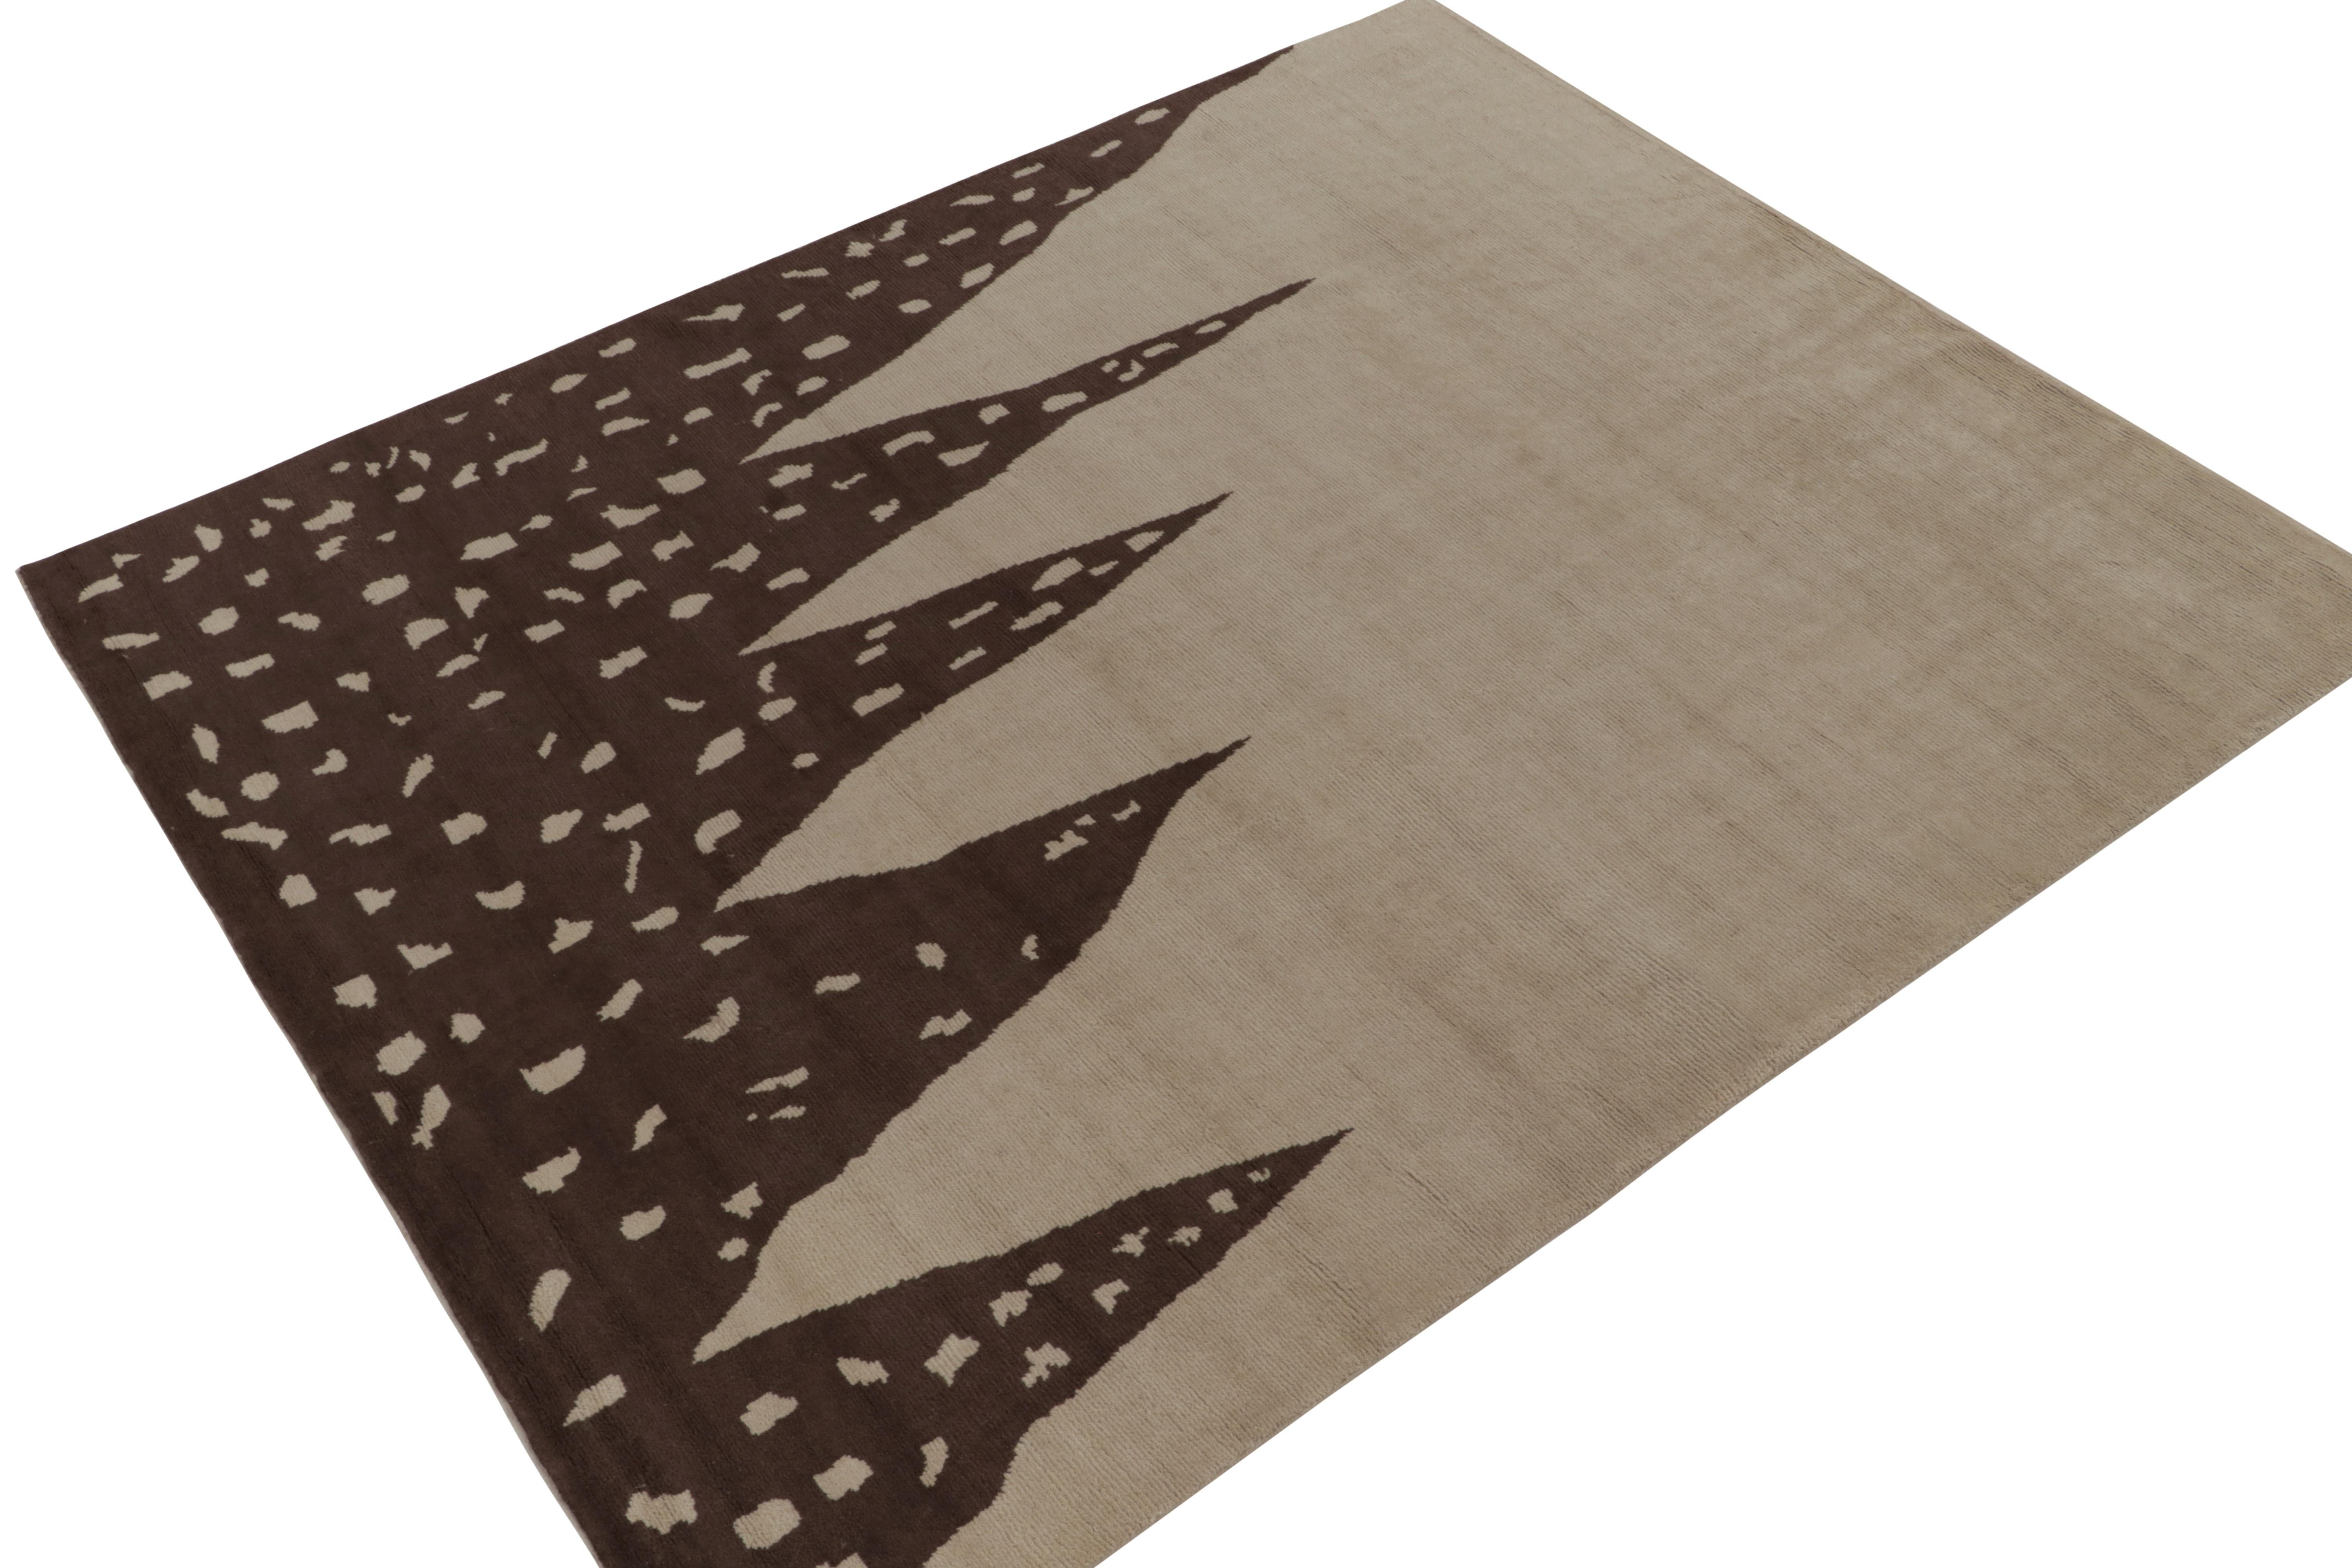 Hand-knotted in luxurious wool, a new 8x10 abstract rug from oRug & Kilim’s bold modern selections. The dual patterns bring the piece to life with an unusual play of comfortable beige-brown with a fabulous juxtaposition of solid color and